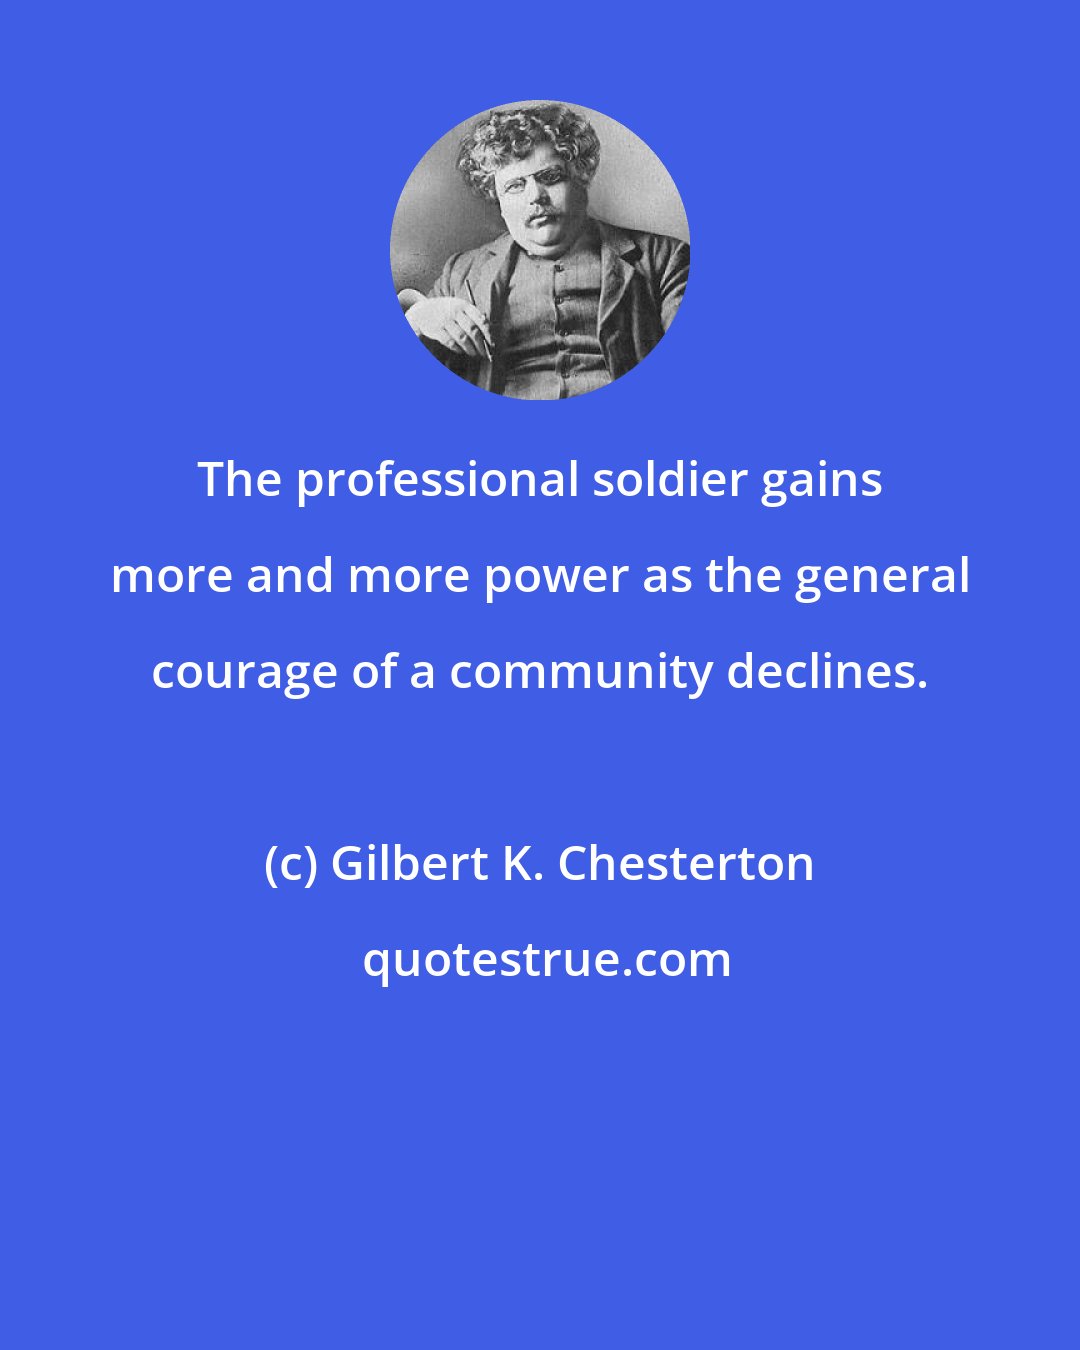 Gilbert K. Chesterton: The professional soldier gains more and more power as the general courage of a community declines.